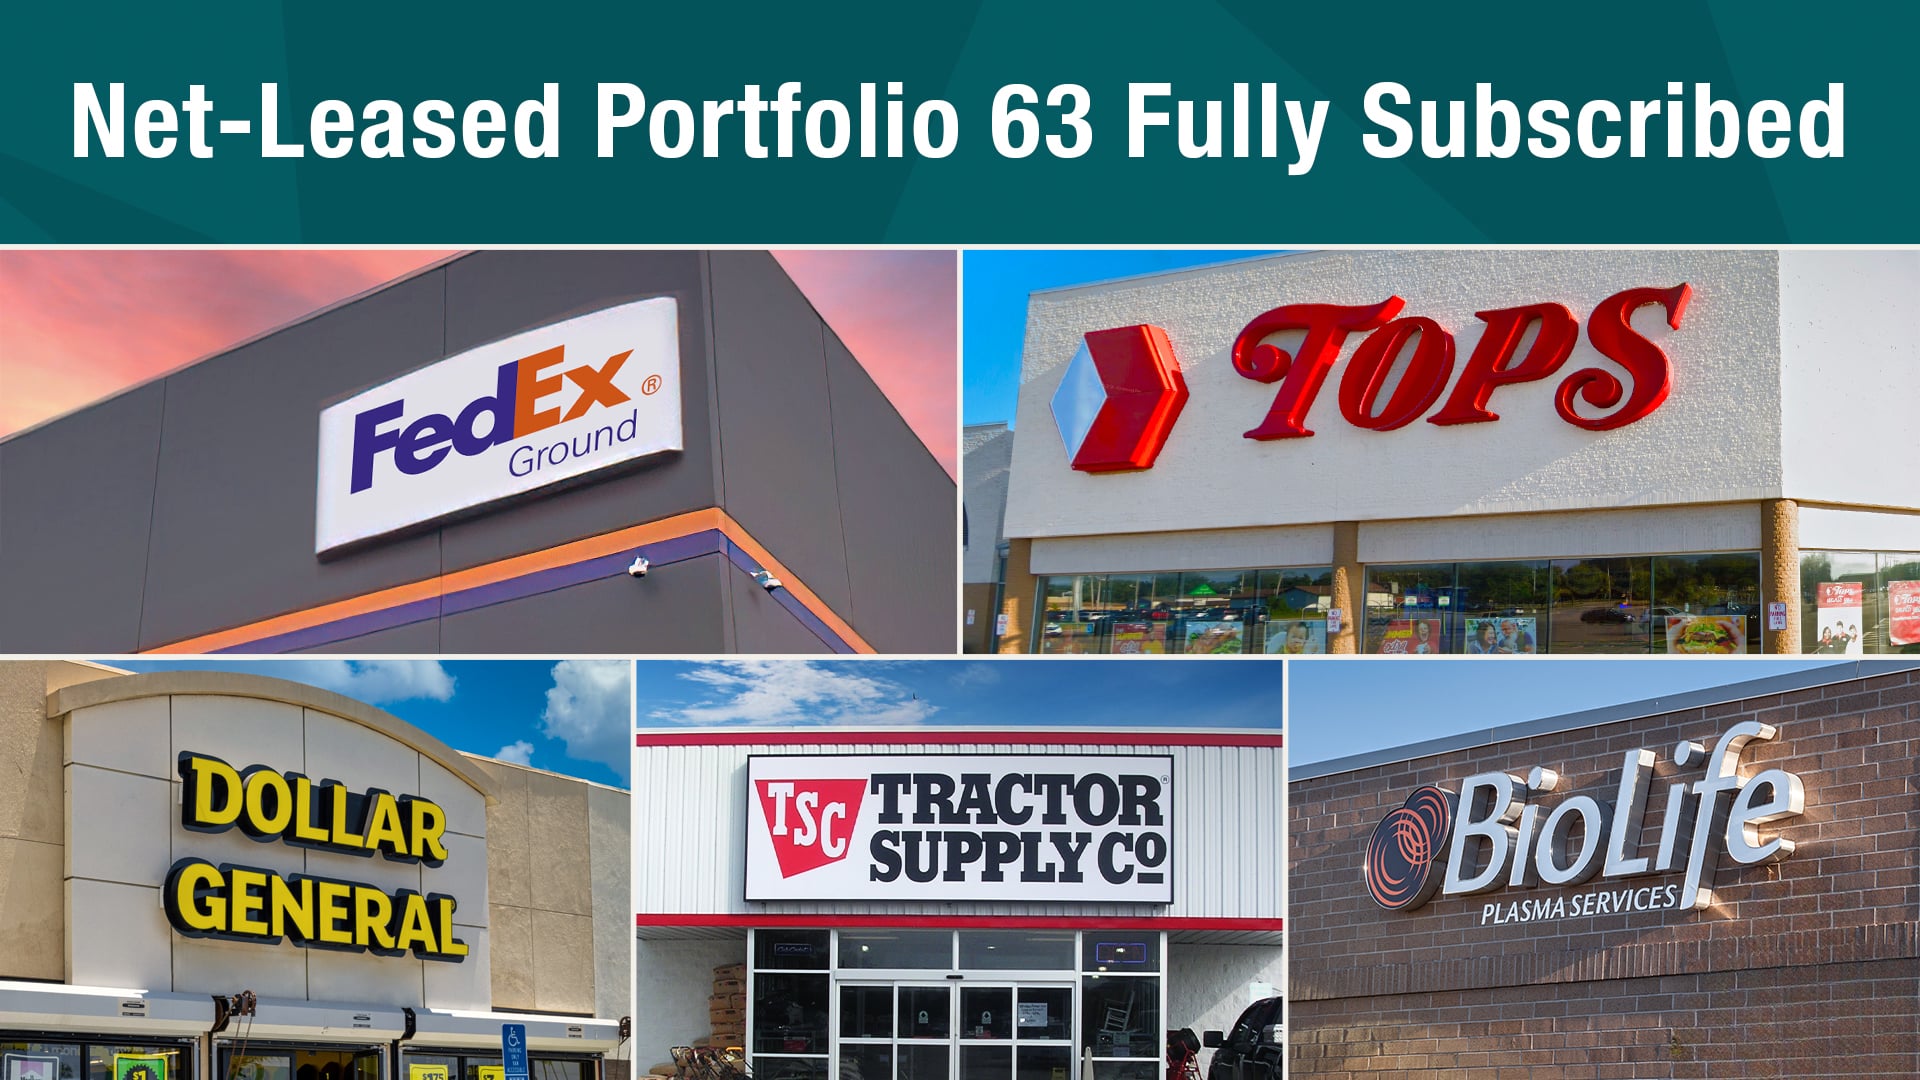 Net-Leased Portfolio 63 - Fully Subscribed